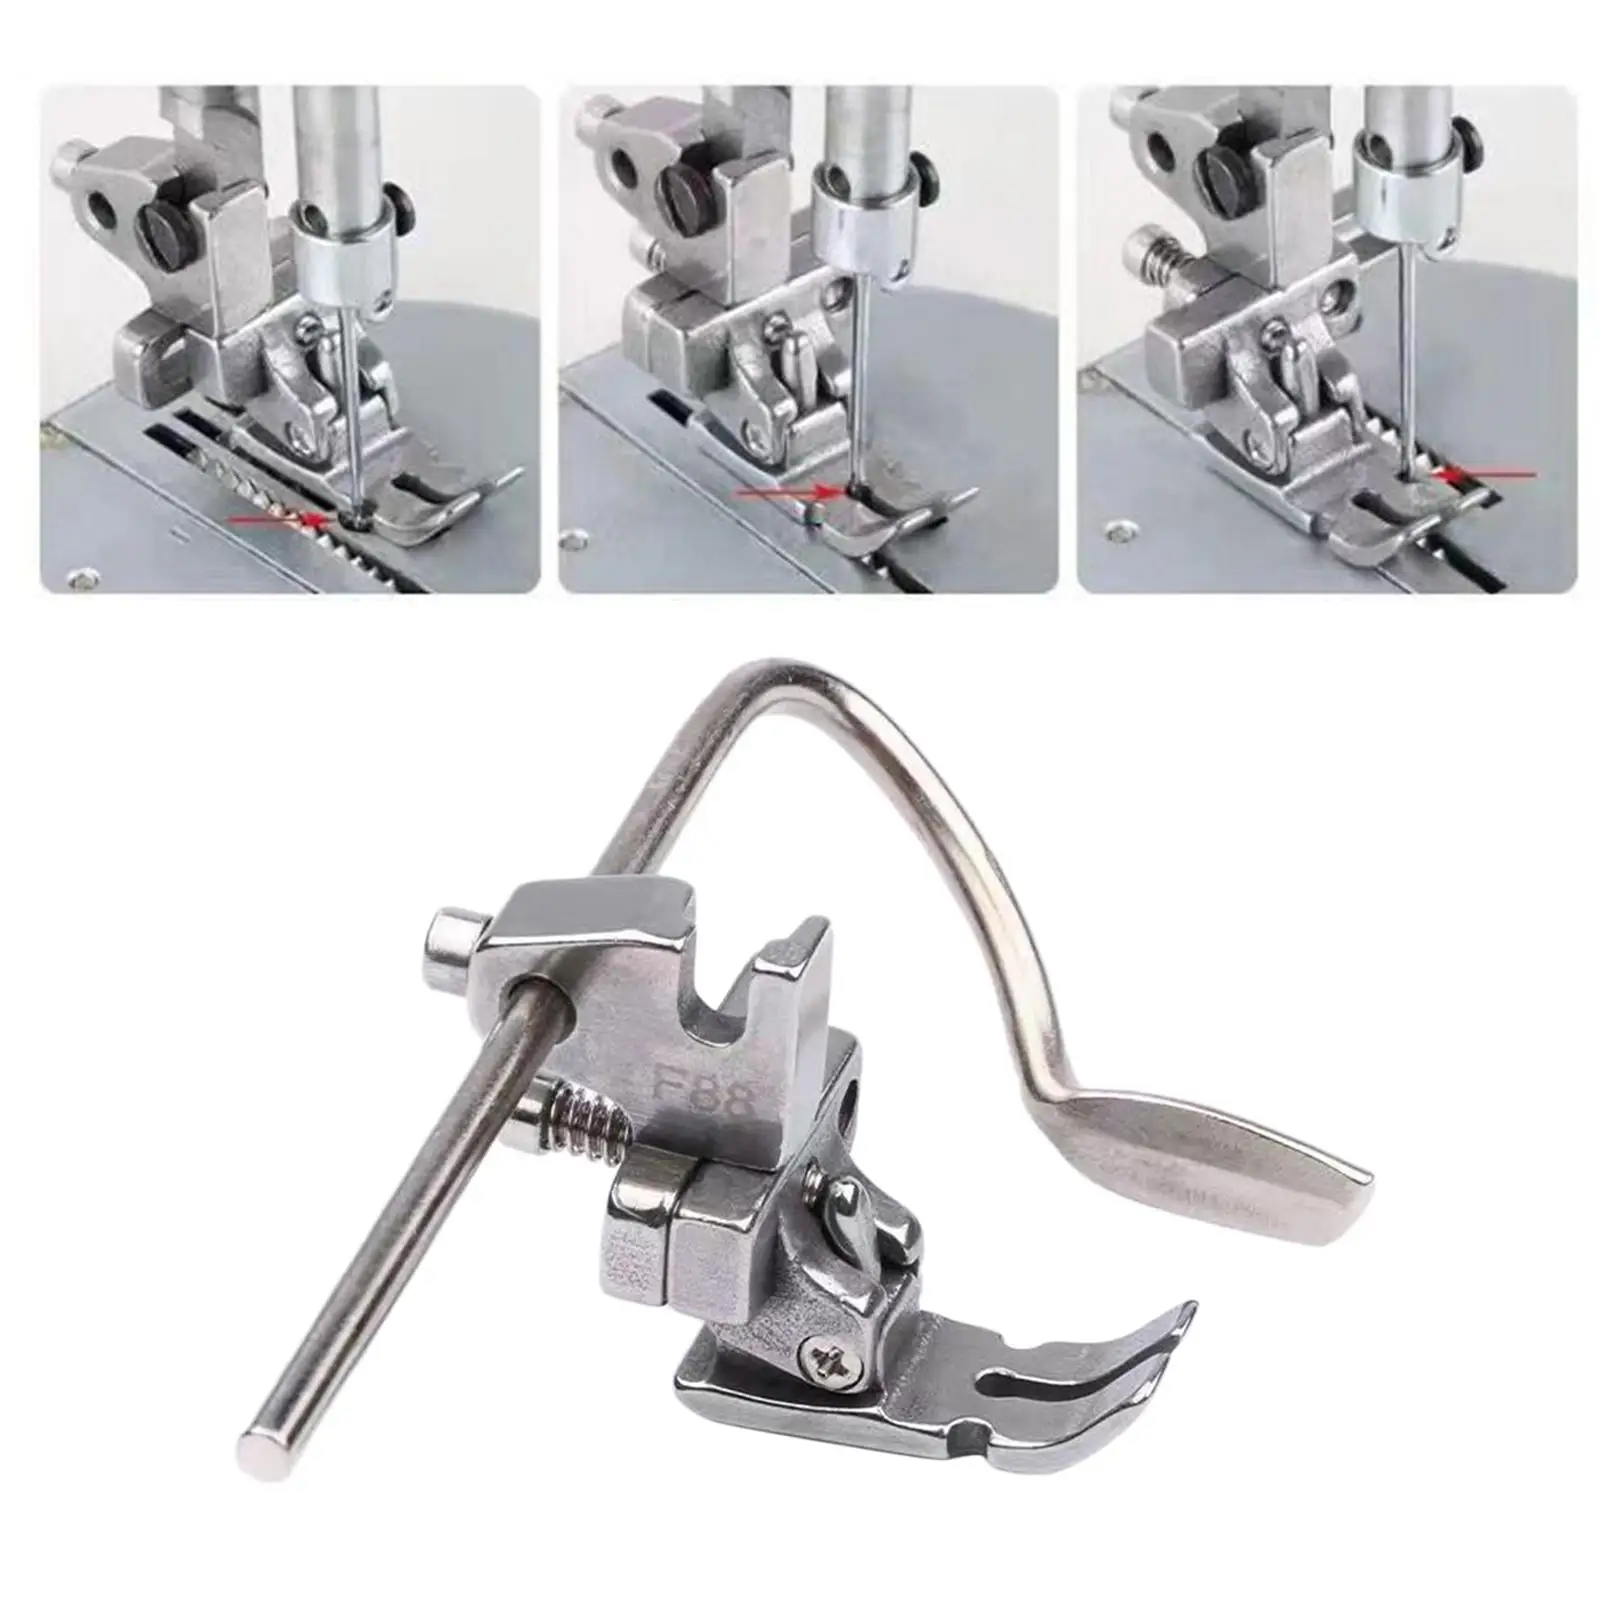 Presser Foot for Sewing Machine Quilting Presser Foot for Cording Stitching